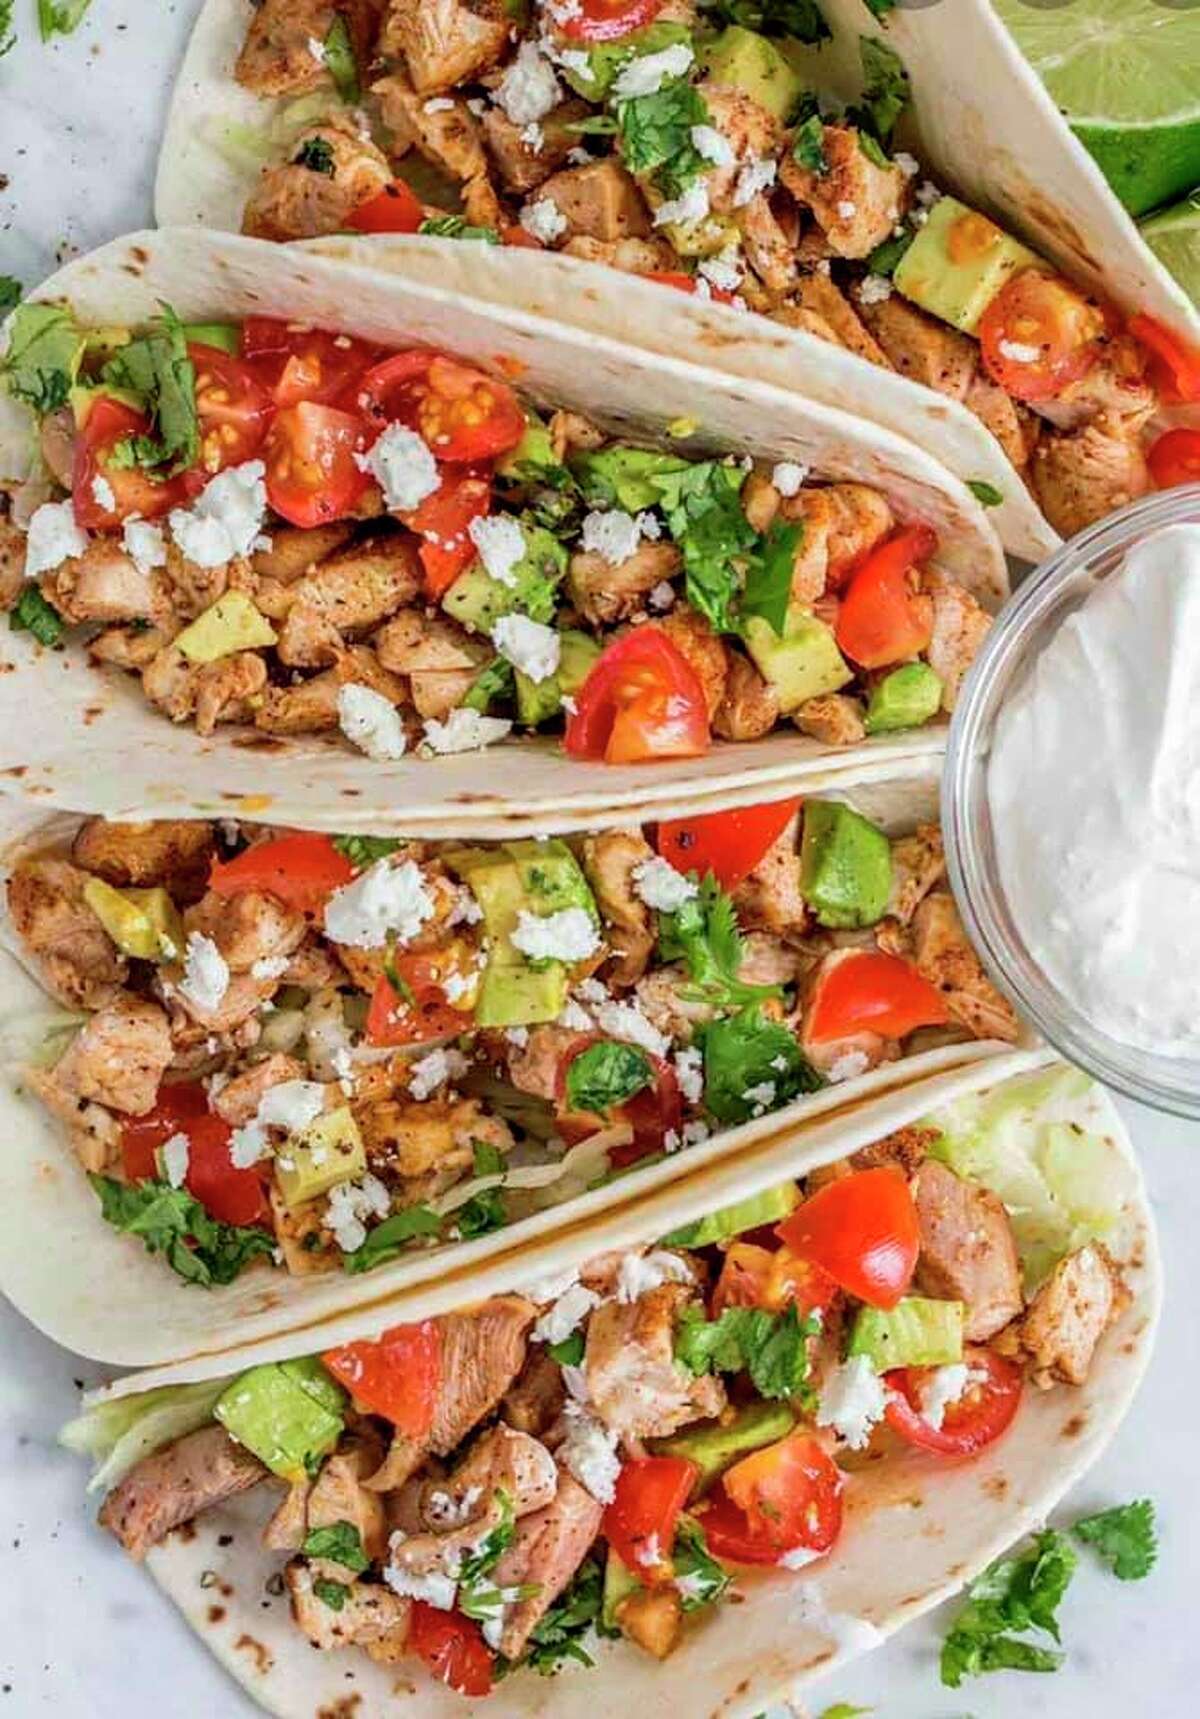 Tacoz & Nachoz, Ron Gokey's second food truck, serves up tacos, nachos, burritos and quesadillas in chicken, ground beef or steak varieties in Beulah. (Courtesy Photo)